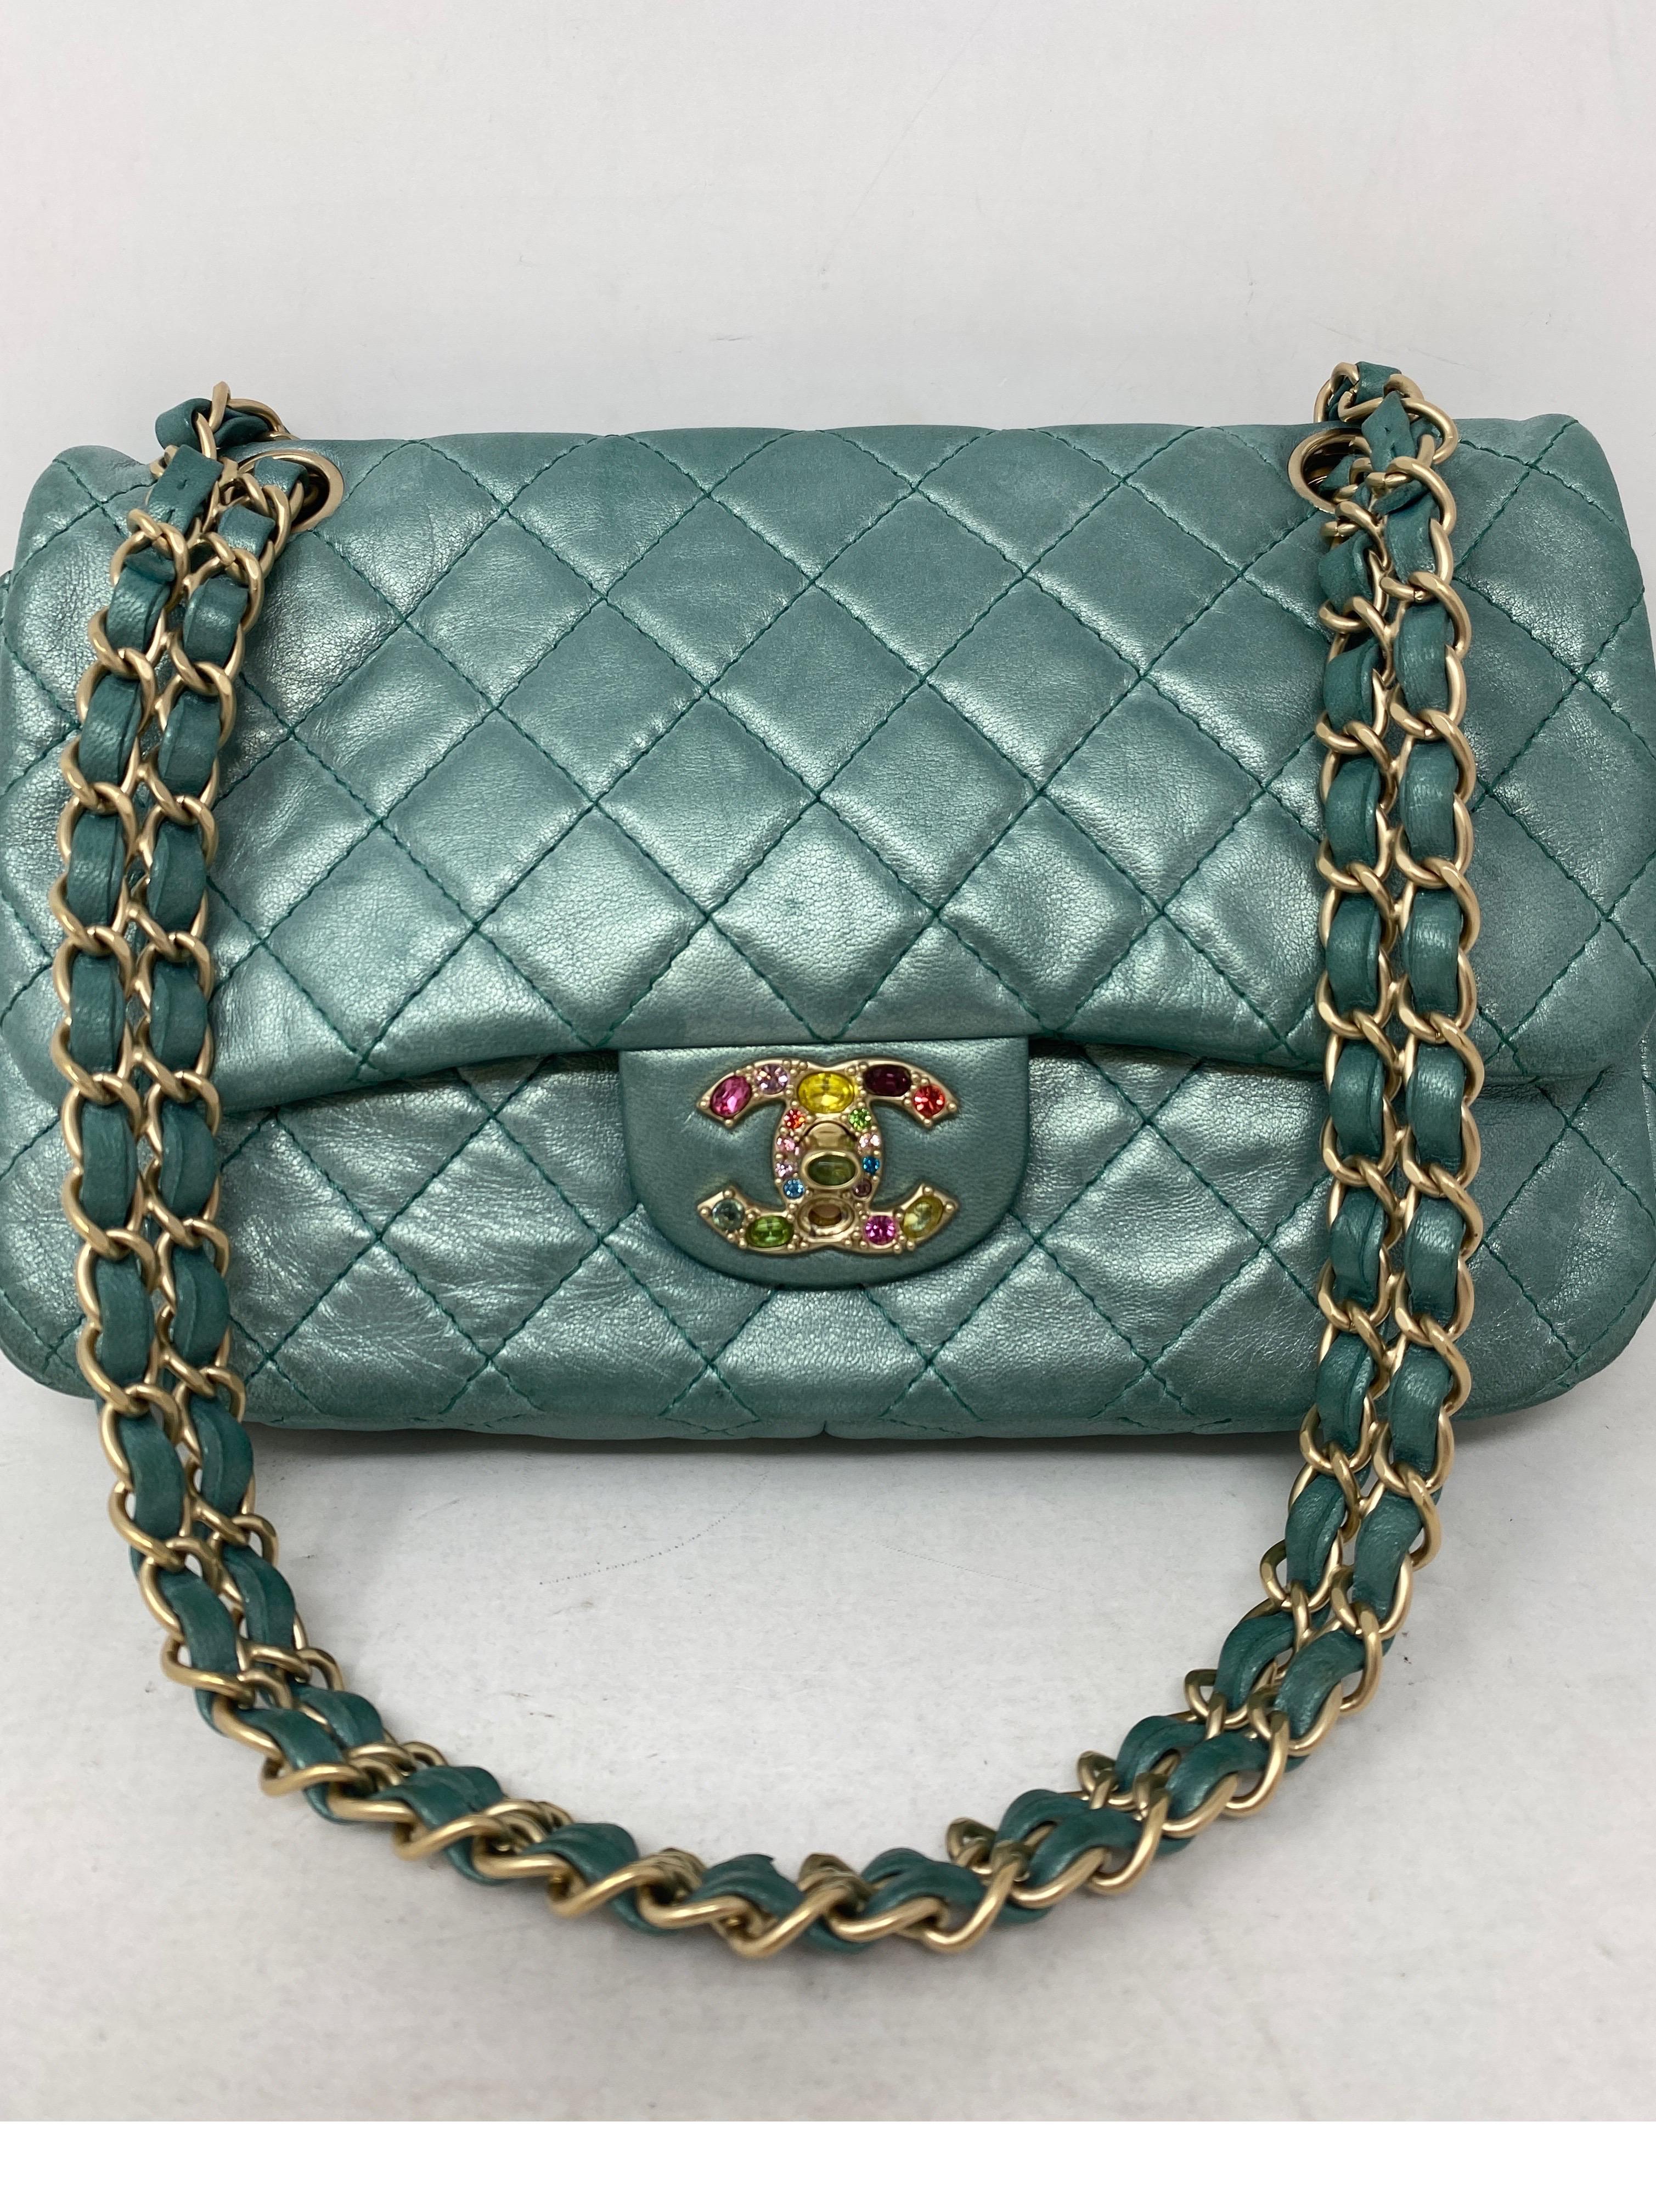 Chanel Teal Jeweled Bag. Soft leather aqua teal color bag. Jeweled multi-colored crystals on clasp. One is missing. Can be easily replaced. Gold tone hardware. Unique Chanel bag. Guaranteed authentic. 